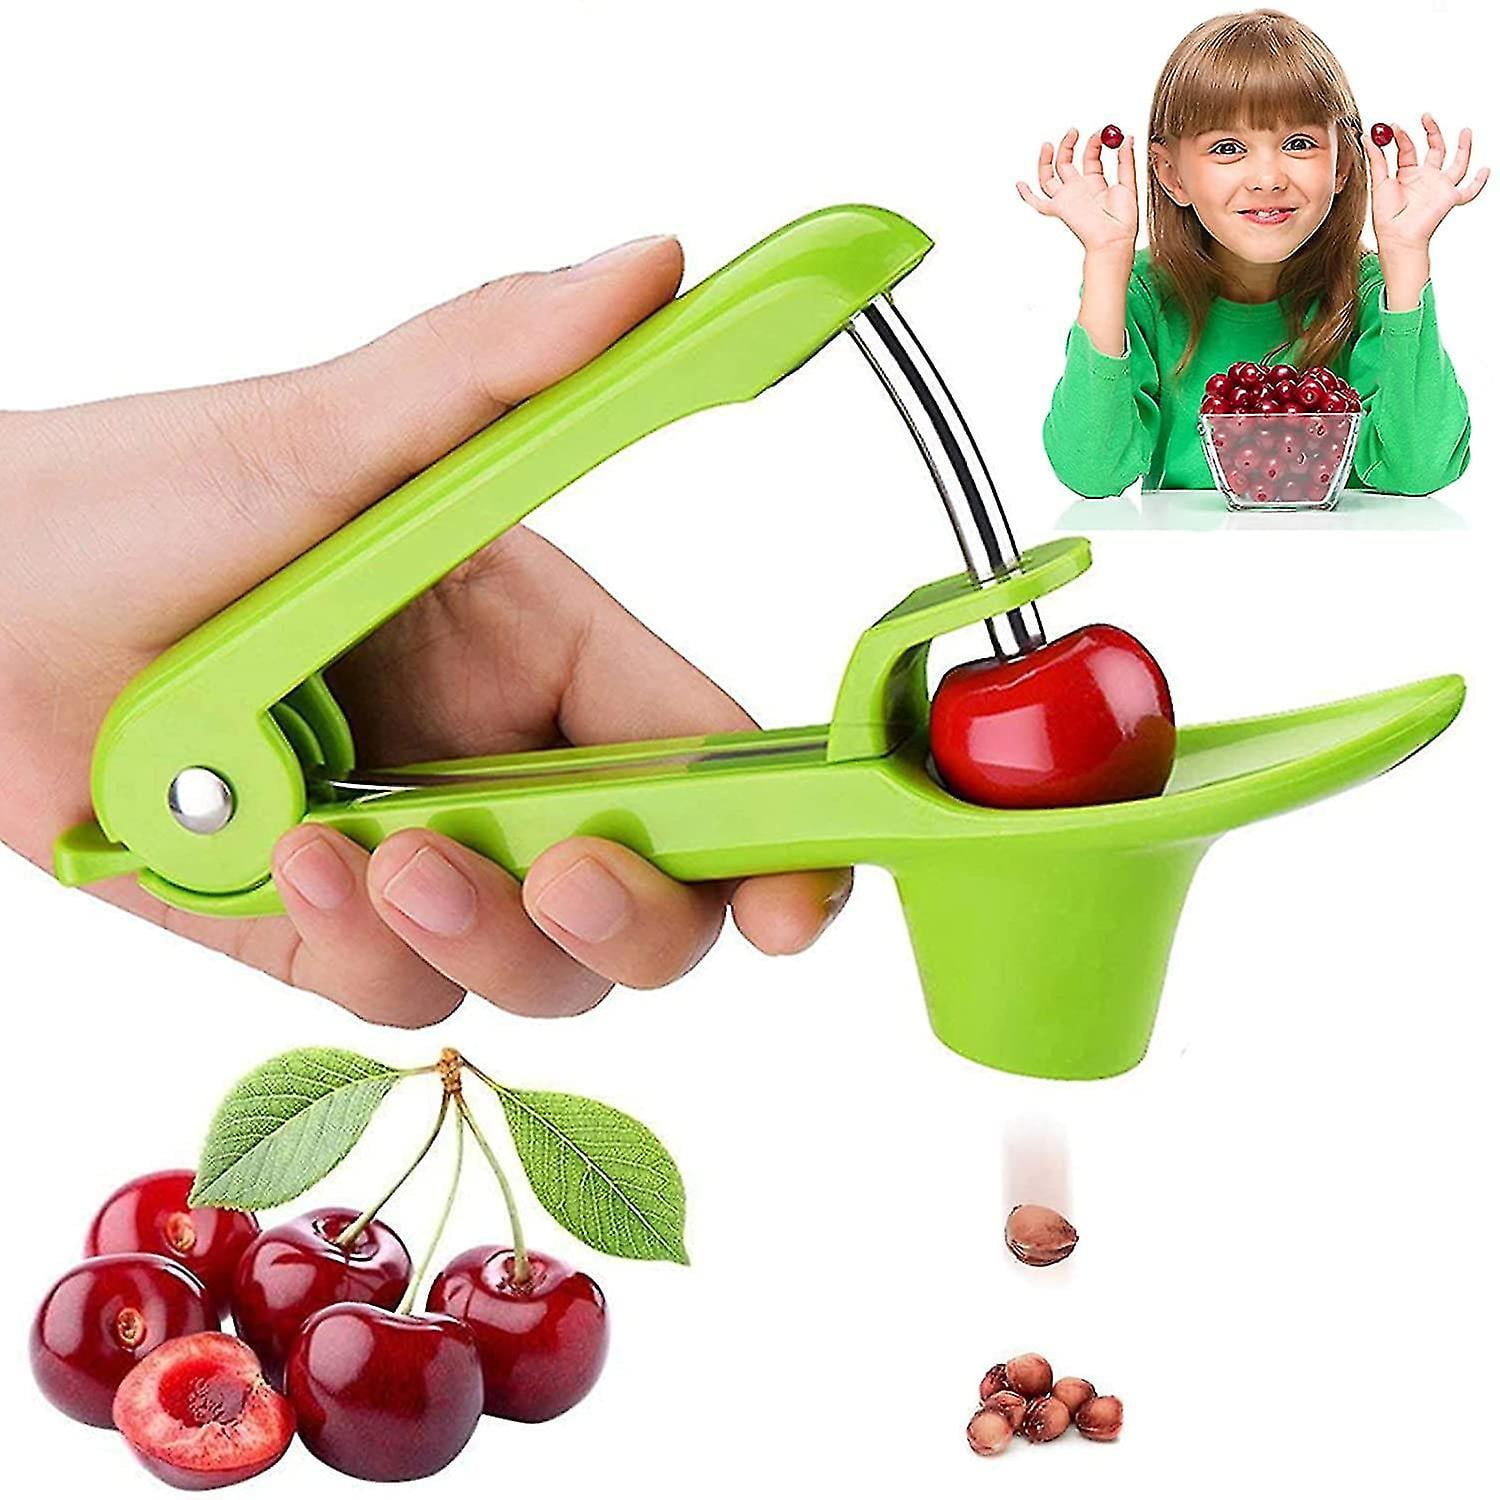 Cherry Pitter Tool Soft Fruit Pit Core Remover Portable Cherry Stoner Olive Pitter Remover For Making Jam,Cooking,Bake And Making Jelly 